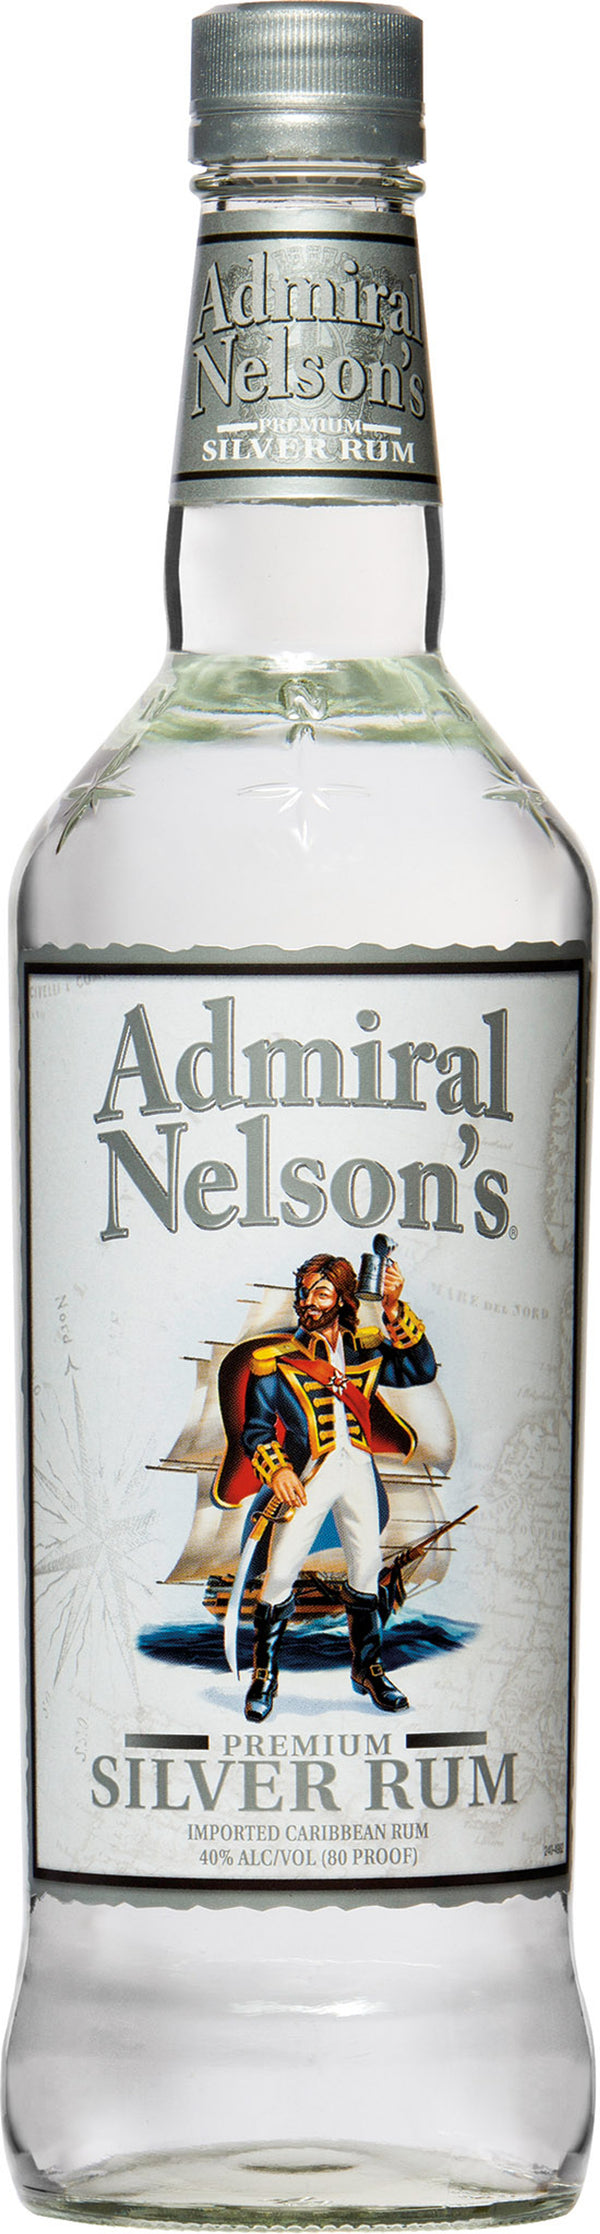 ADMIRAL NELSON'S SILVER